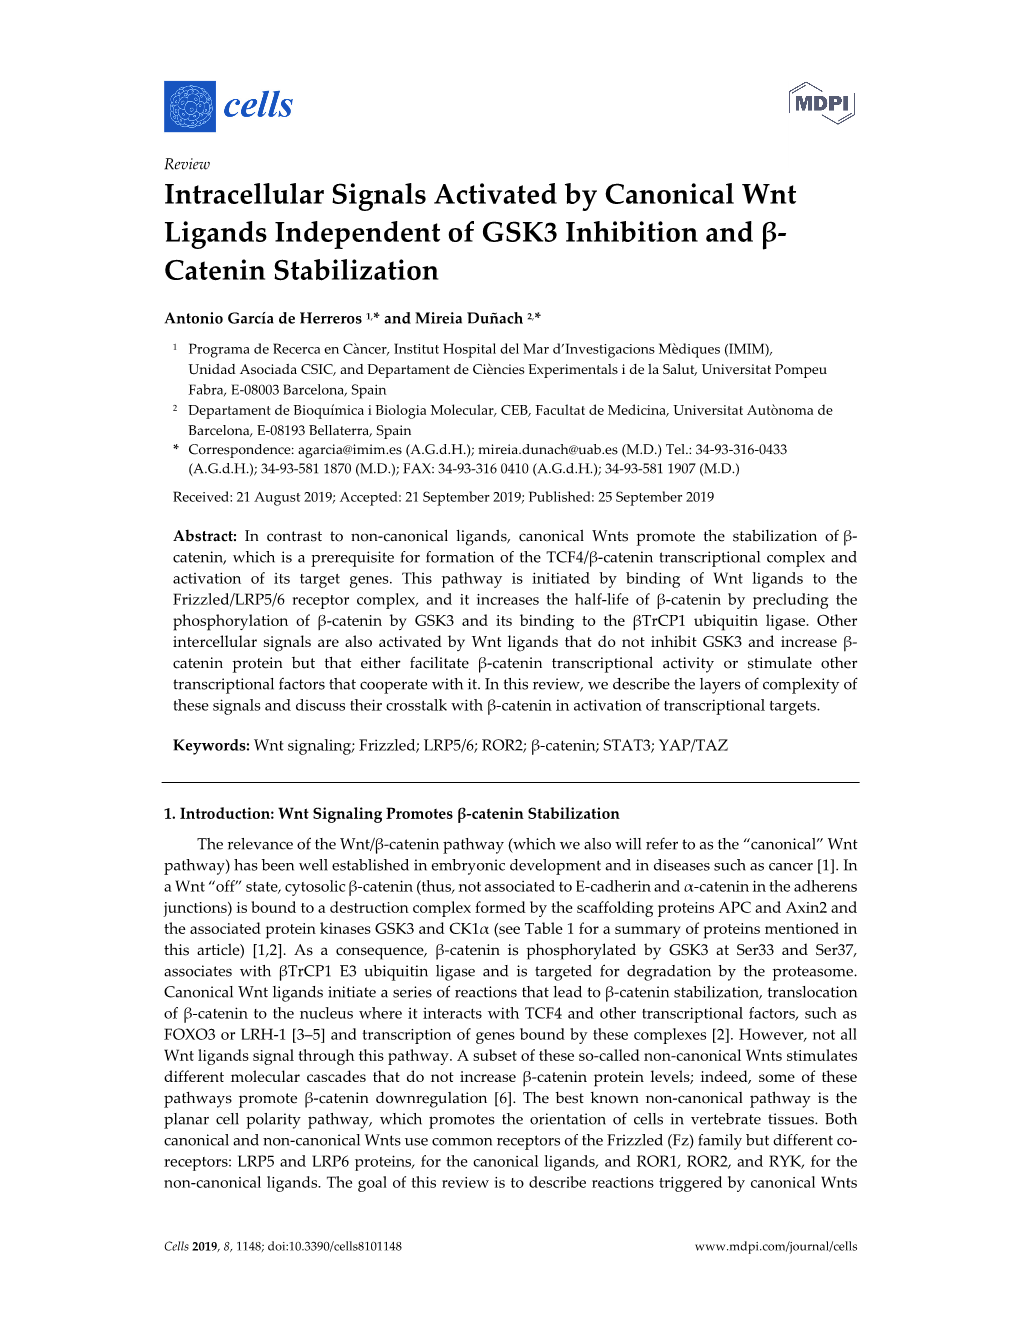 Intracellular Signals Activated by Canonical Wnt Ligands Independent of GSK3 Inhibition and Β- Catenin Stabilization